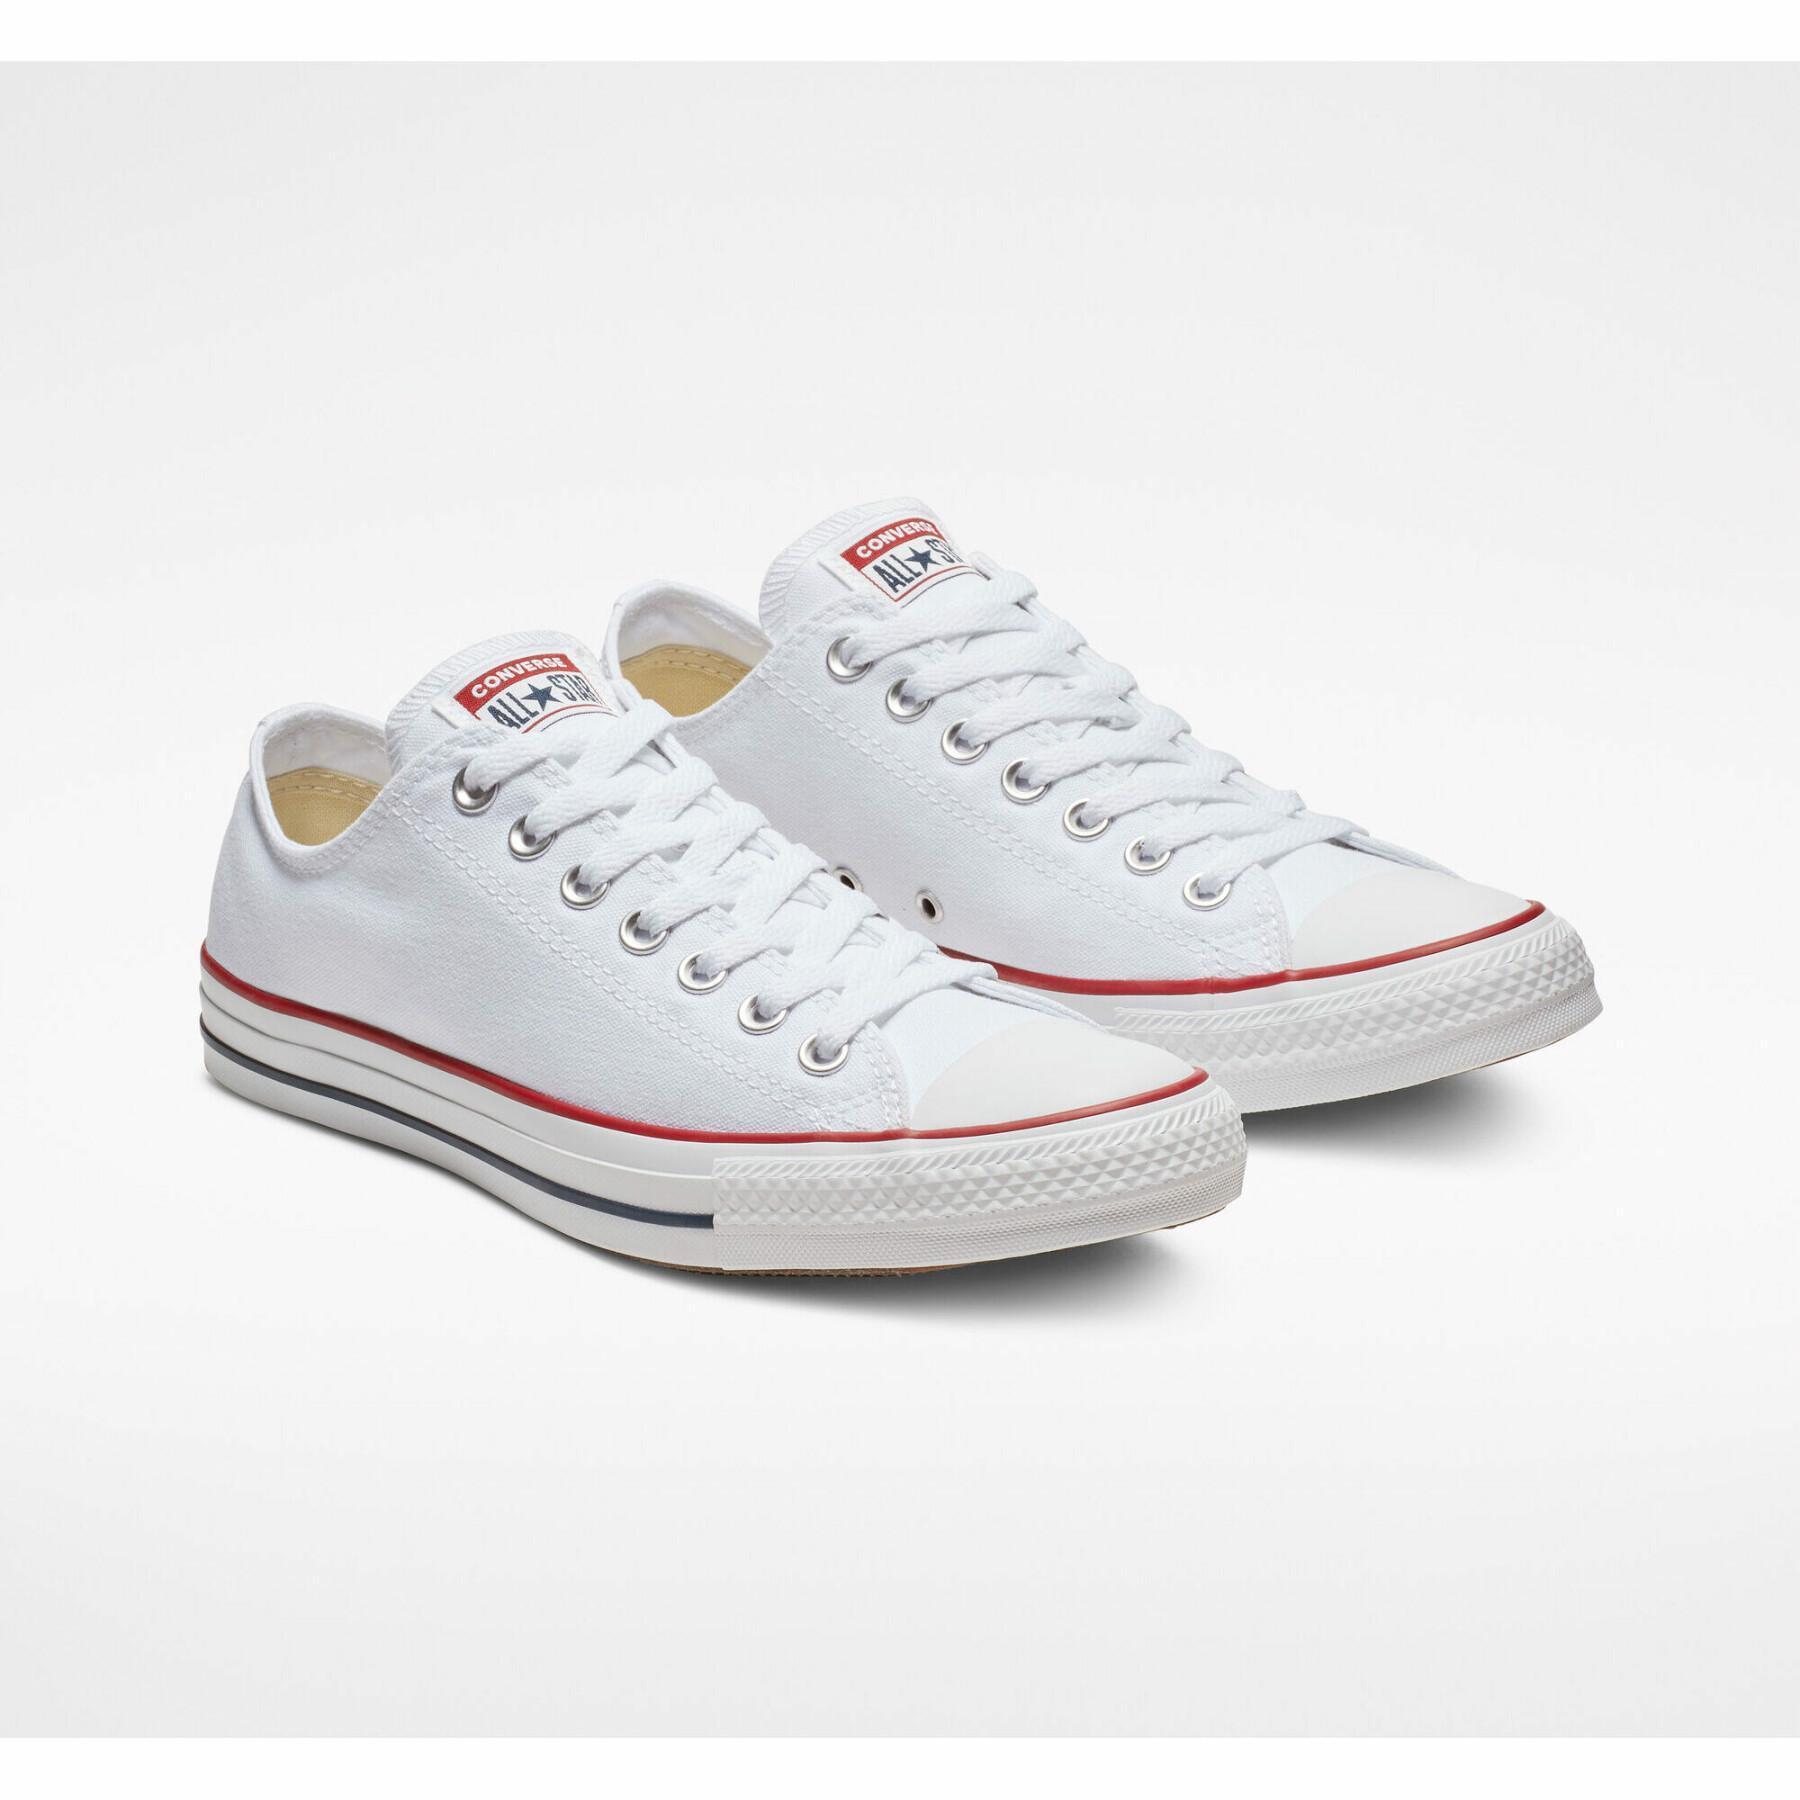 Formadores Converse Chuck Taylor All Star classic